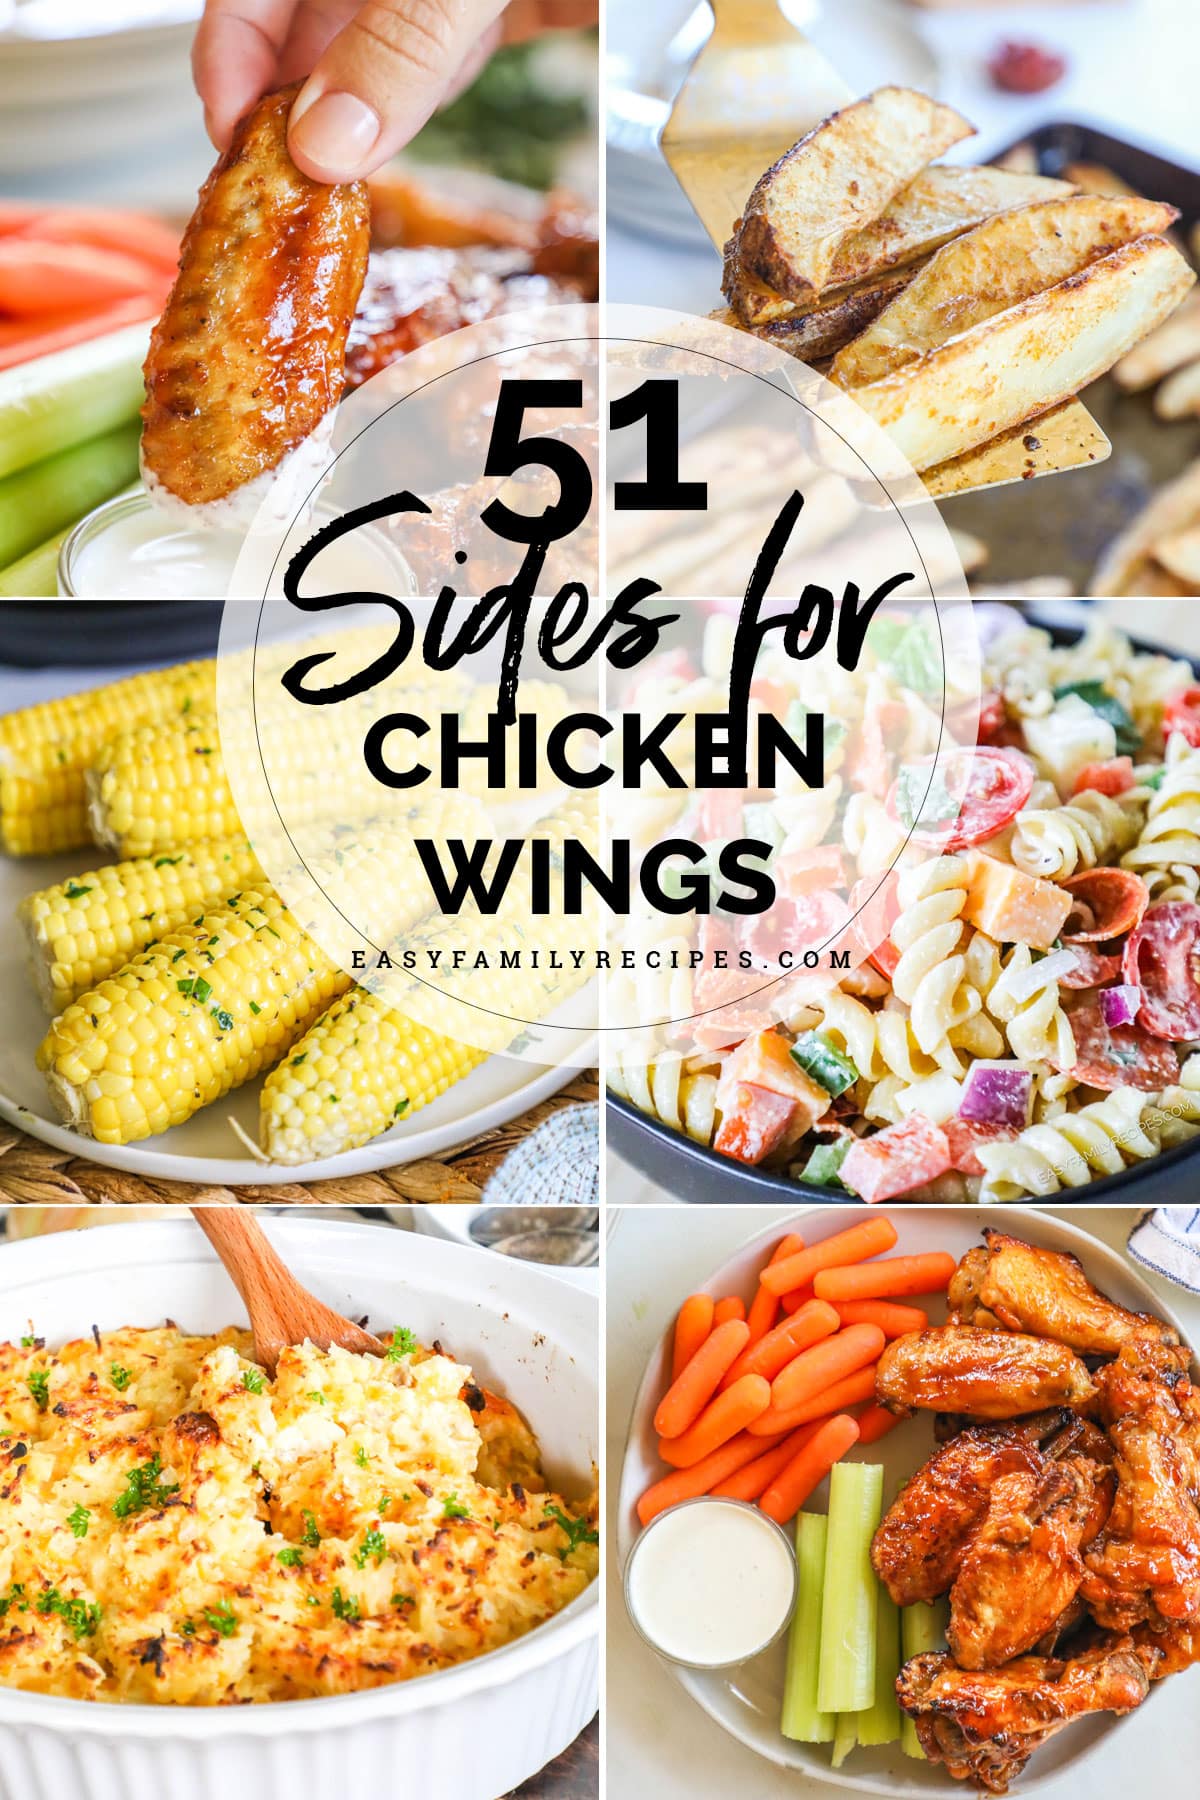 51+ Best Sides for Chicken Wings · Easy Family Recipes